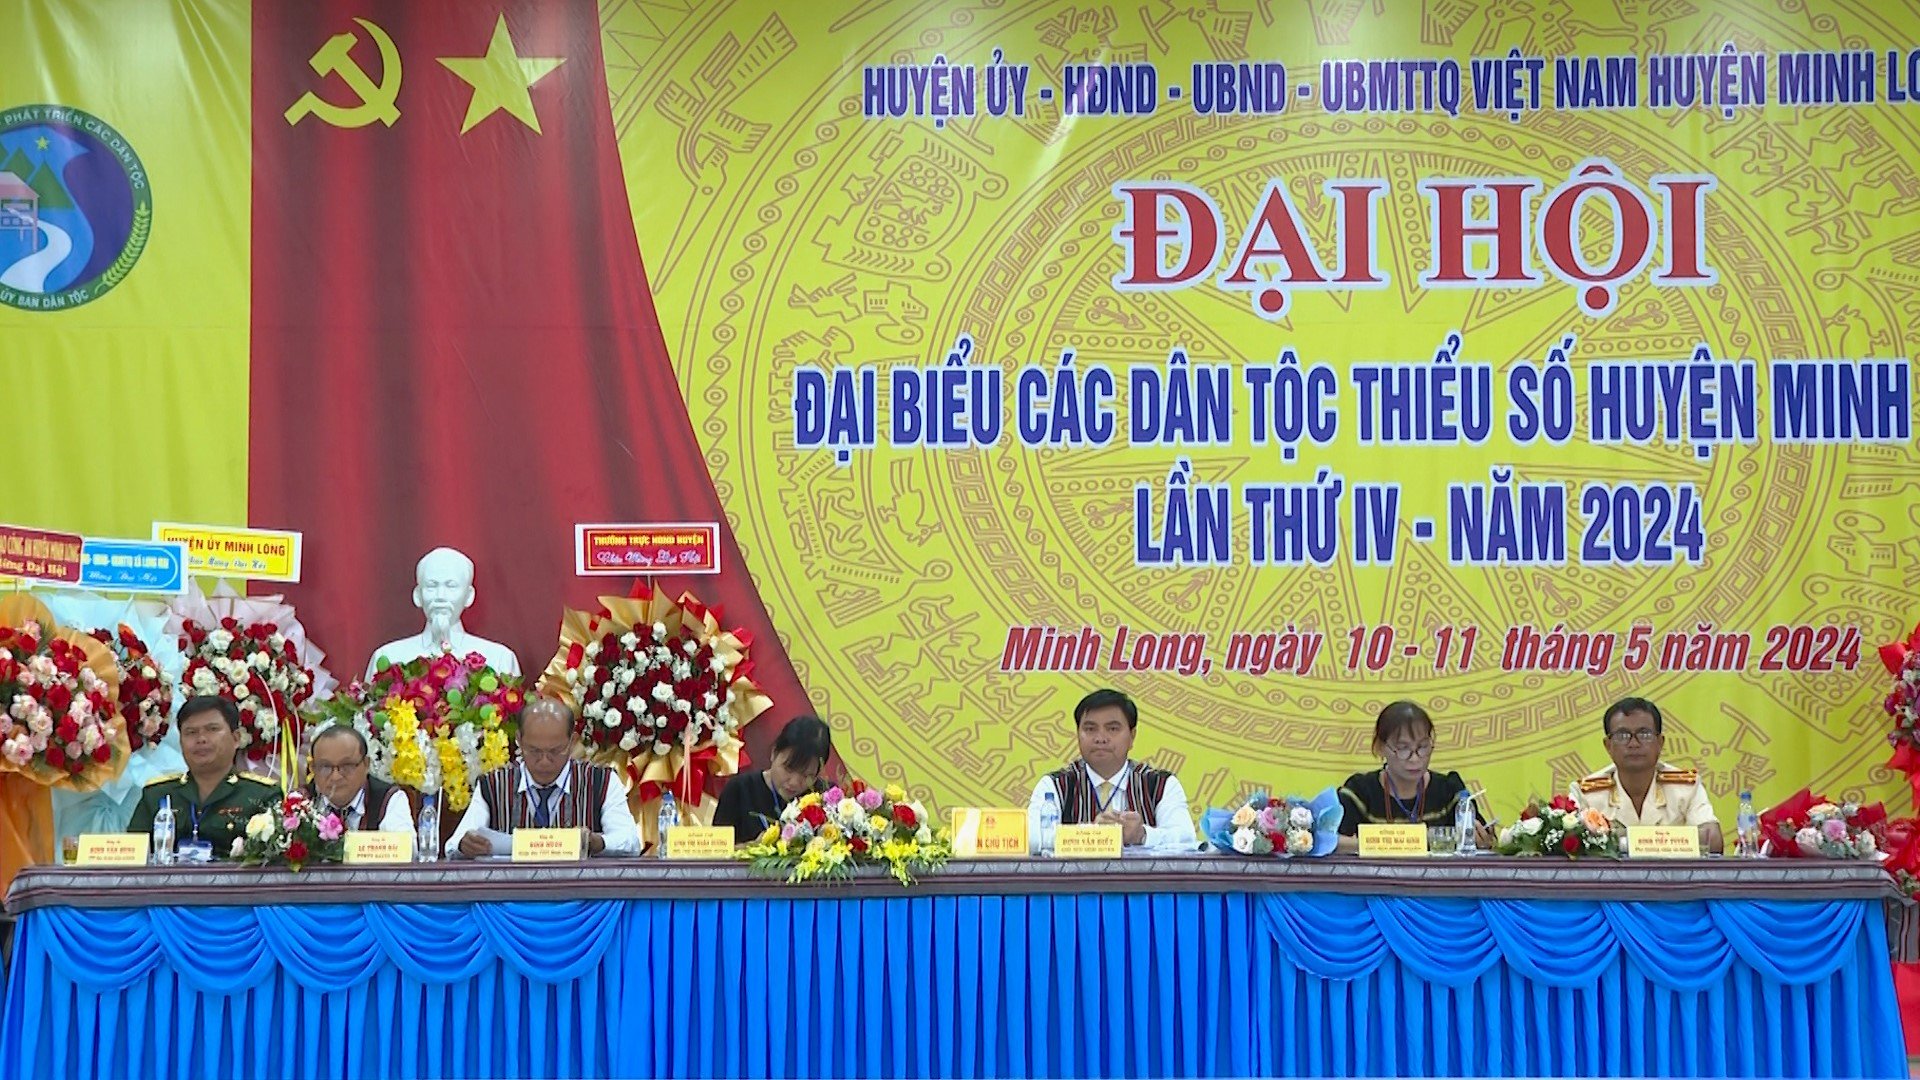 The 4th Congress of Minh Long Ethnic Minority Delegates opens